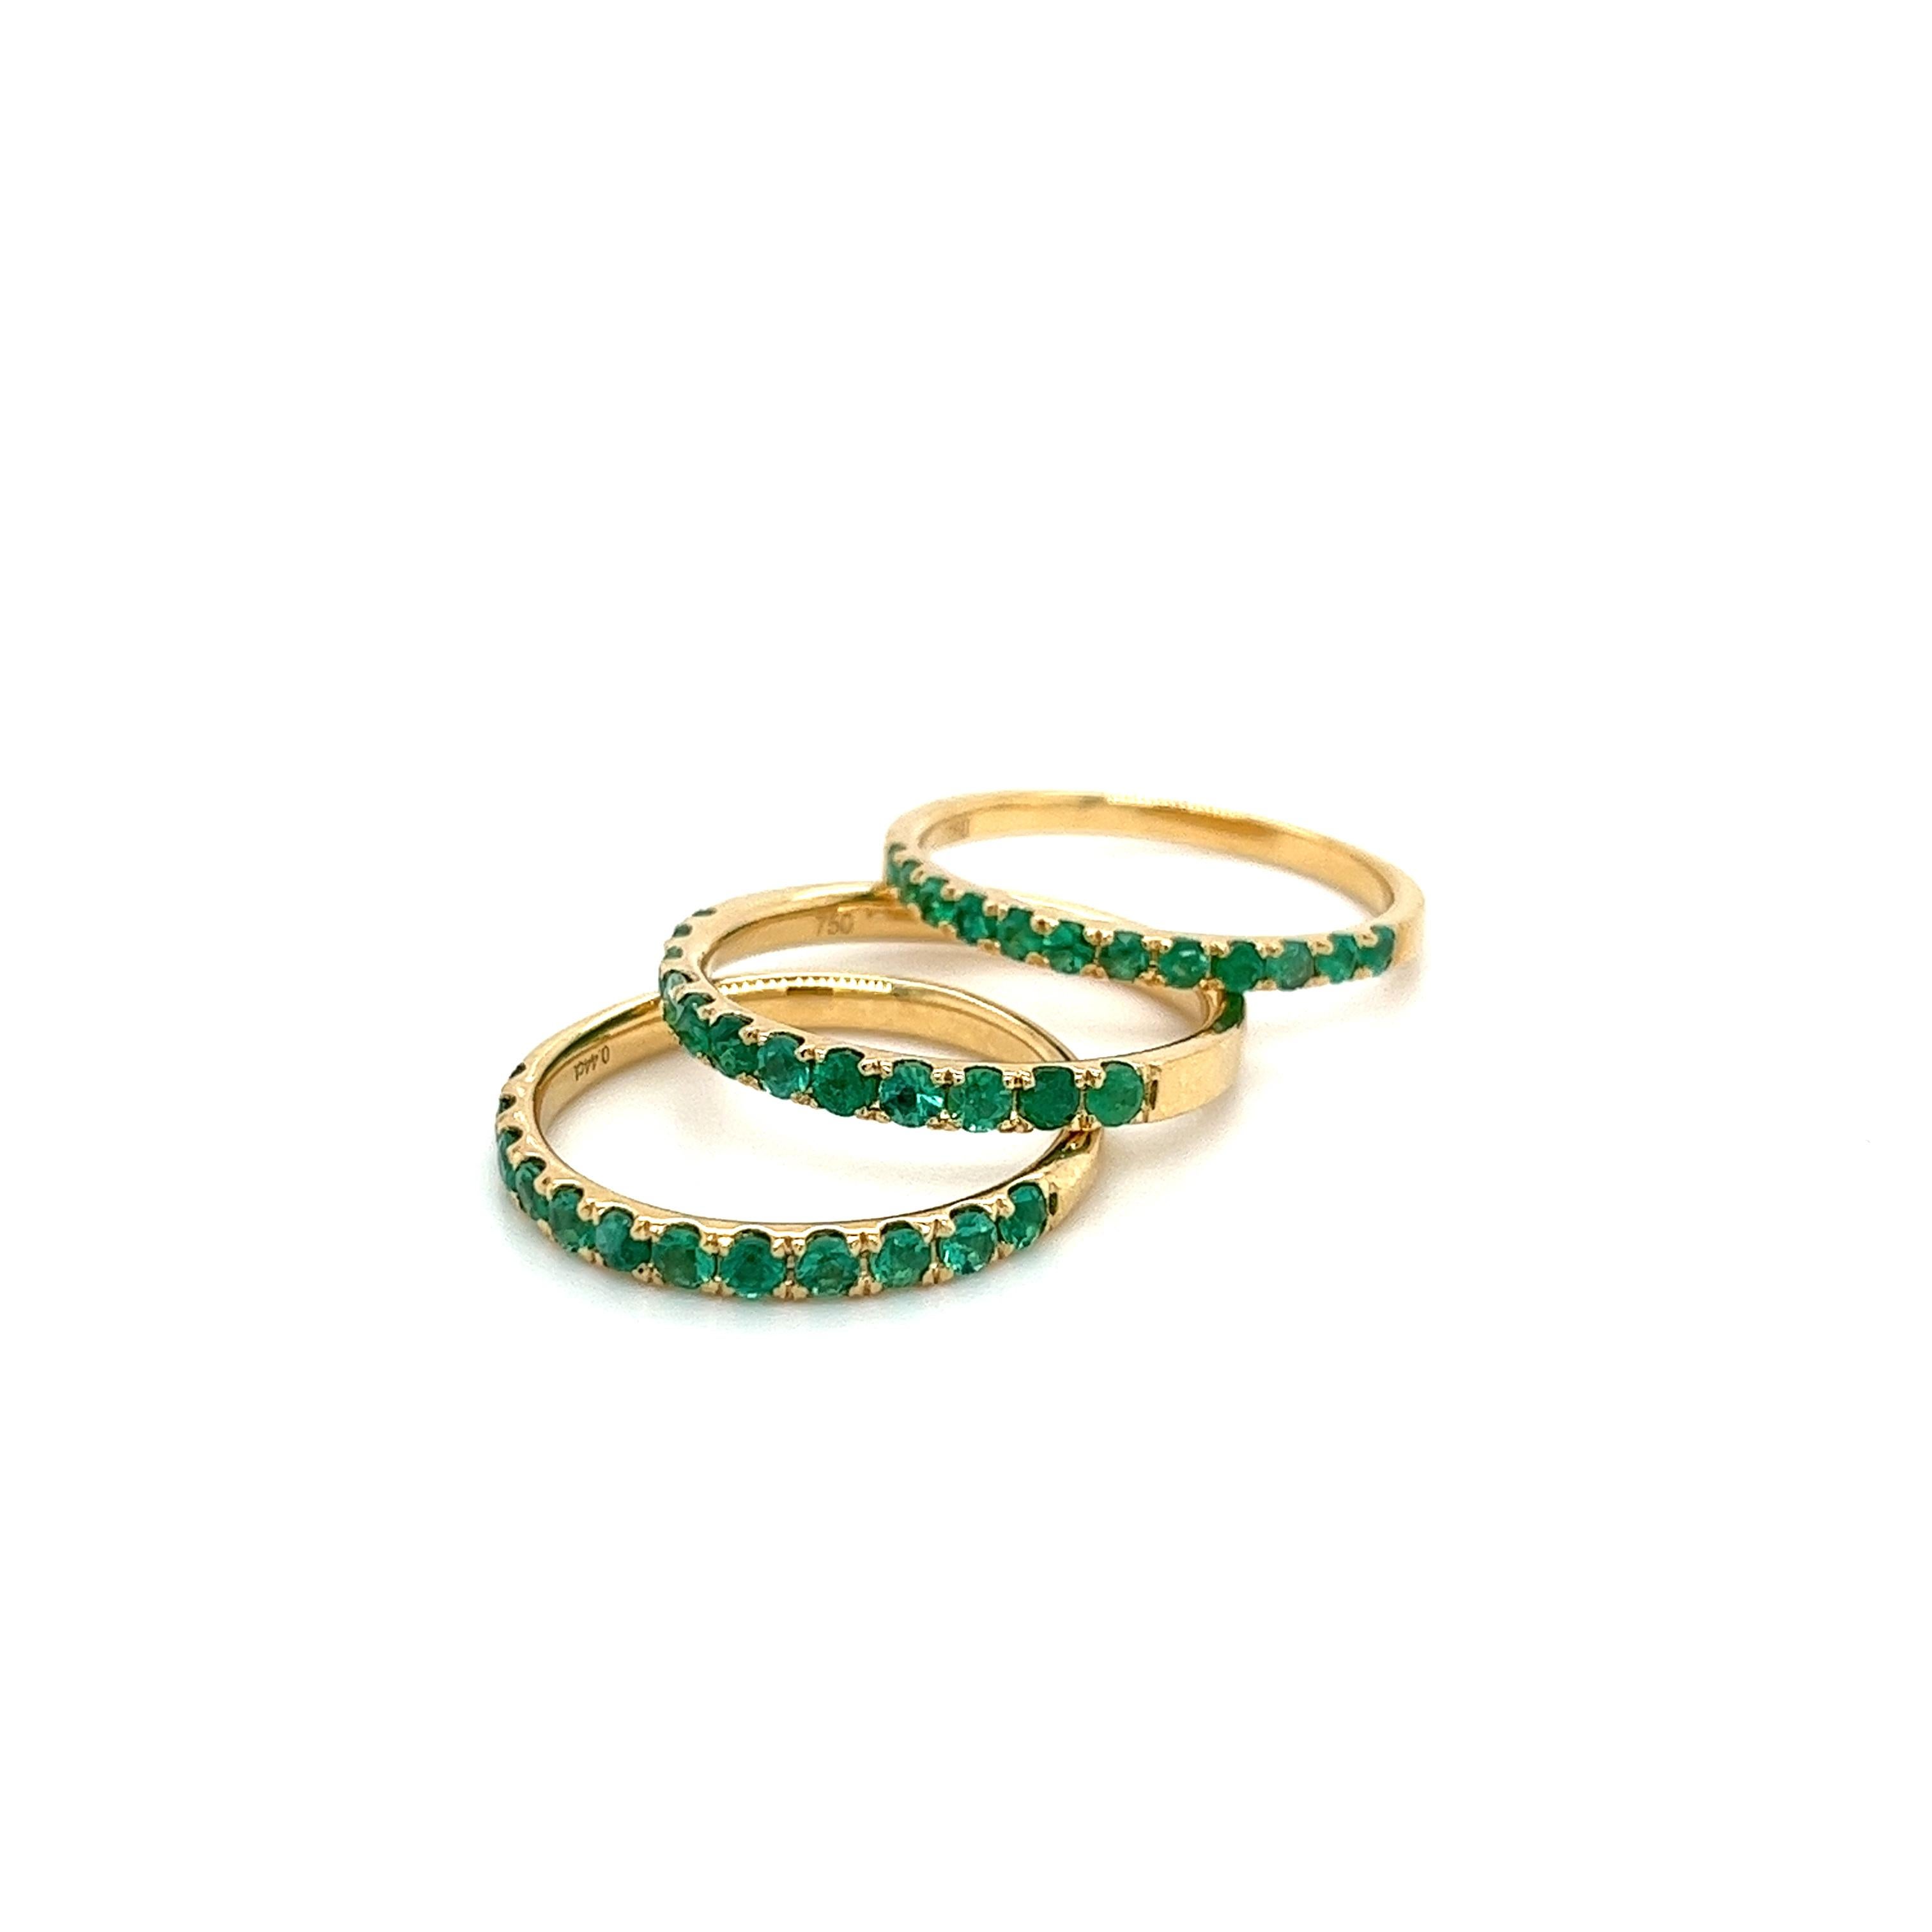 Natural Colombian Emerald stackable band ring set in 18k solid gold. Available in sizes 6.5, 7, and 7.5. 

FEATURES: 7 day risk free returns, certificate of appraisal, gift box + travel pouch, free pair of natural diamond stud earrings. 

Details: